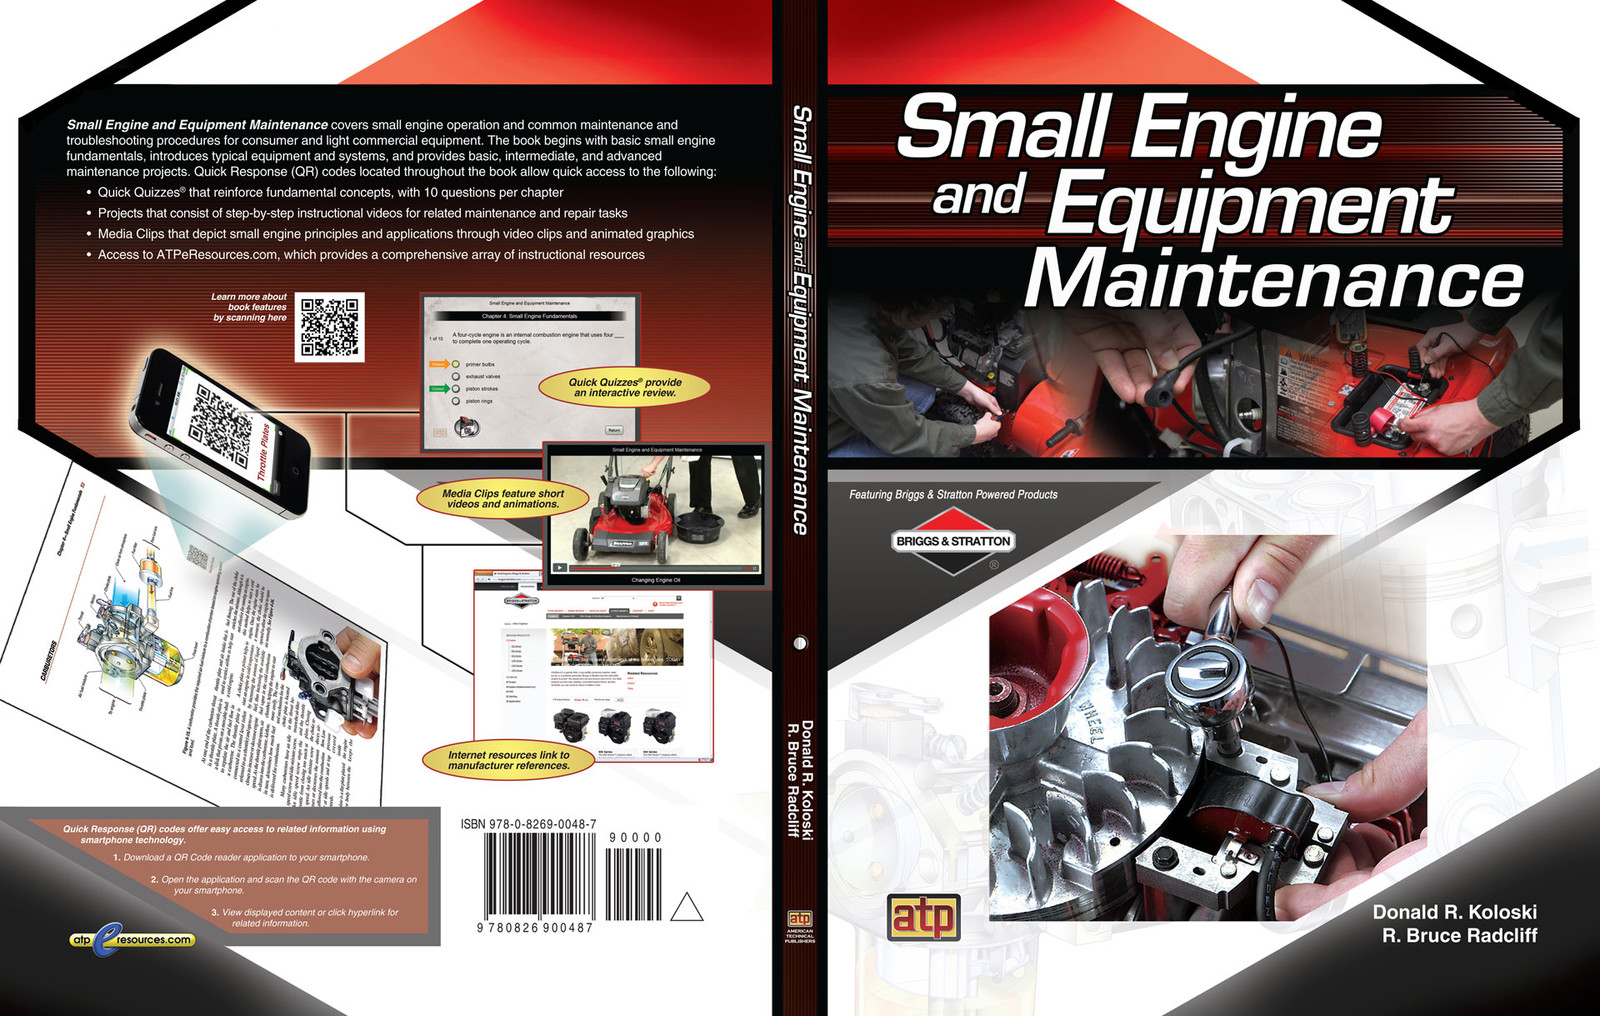 This was a softcover book with a design meant to mimic the Briggs and Stratton logo. I created the design in Adobe Photoshop with final text touches in Adobe Illustrator.